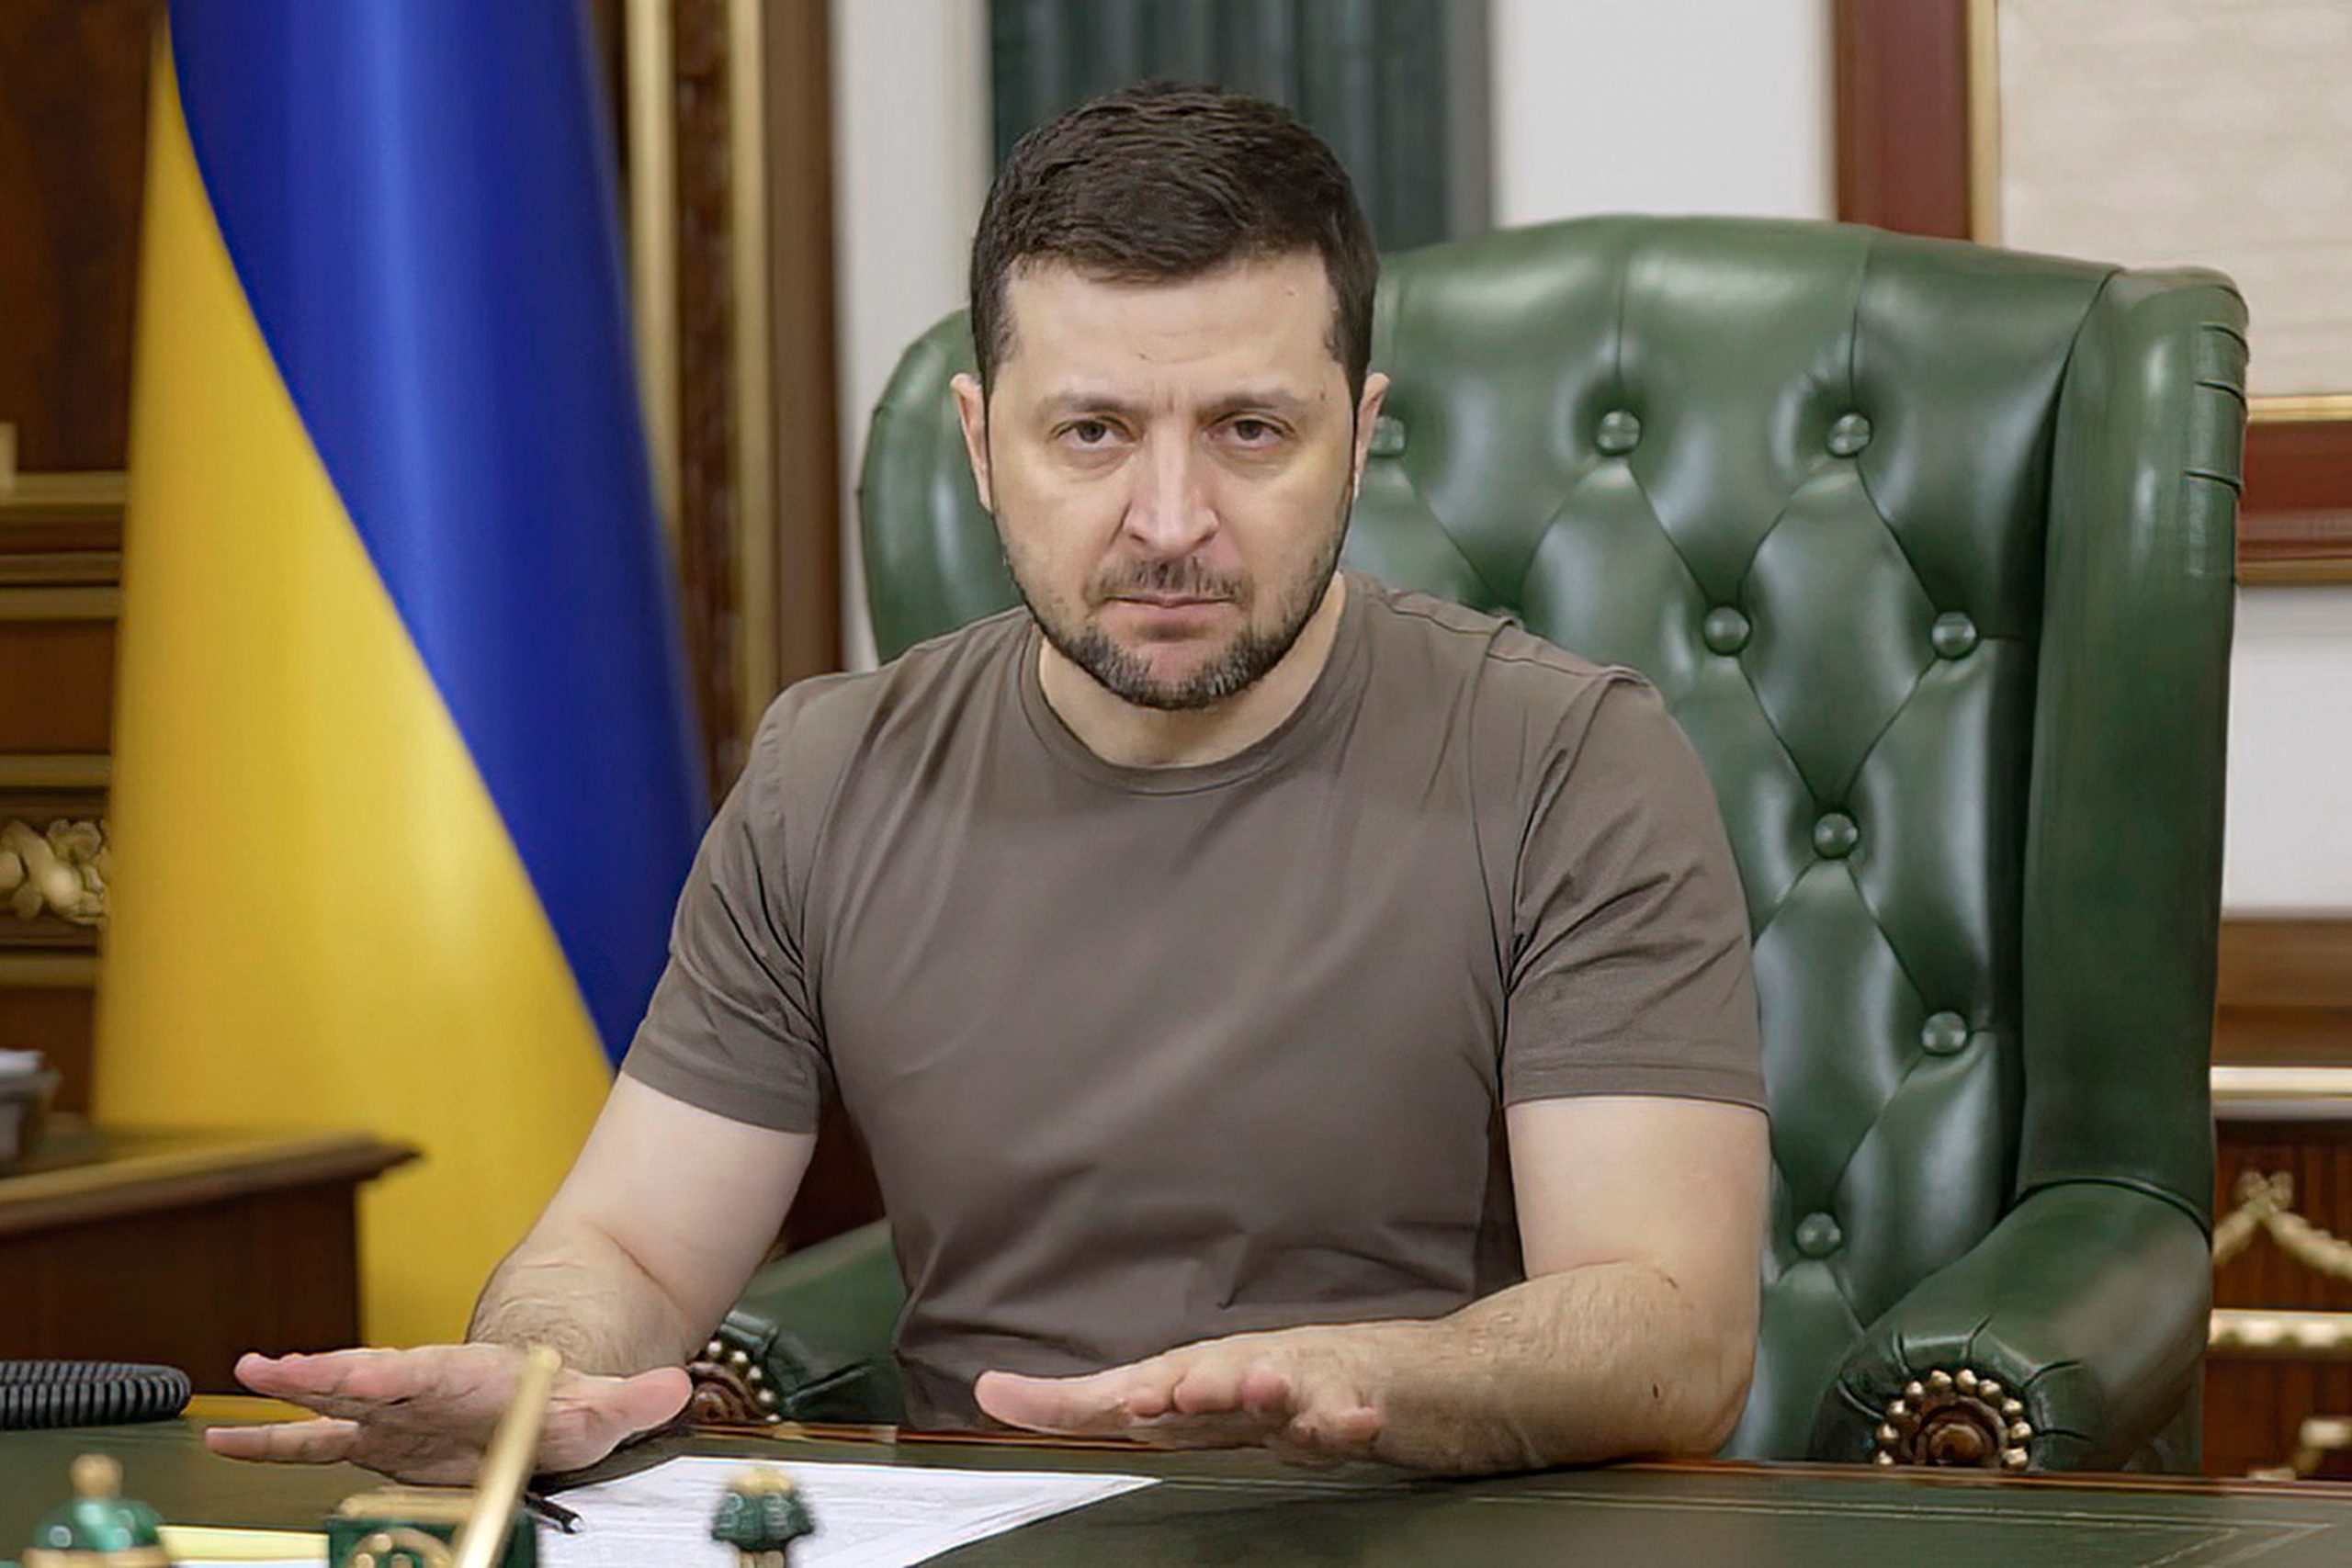 Zelensky welcomes armoured vehicles from UK, urges West to follow suit